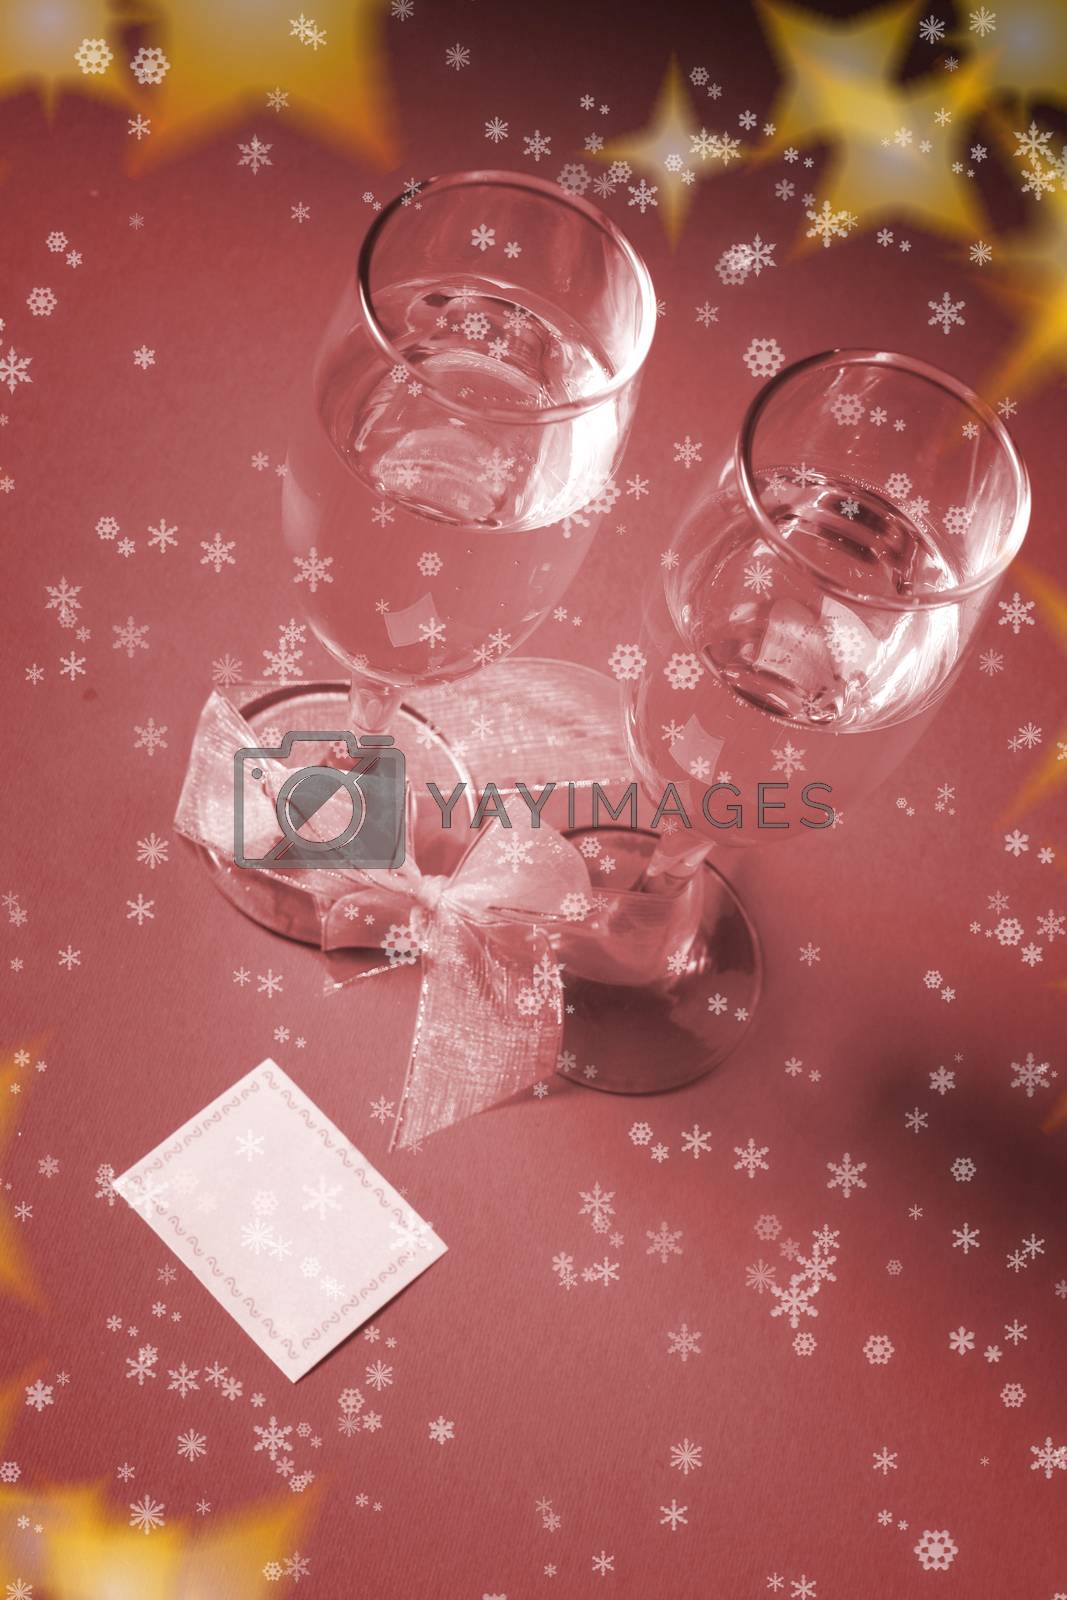 Royalty free image of Champagne by arosoft